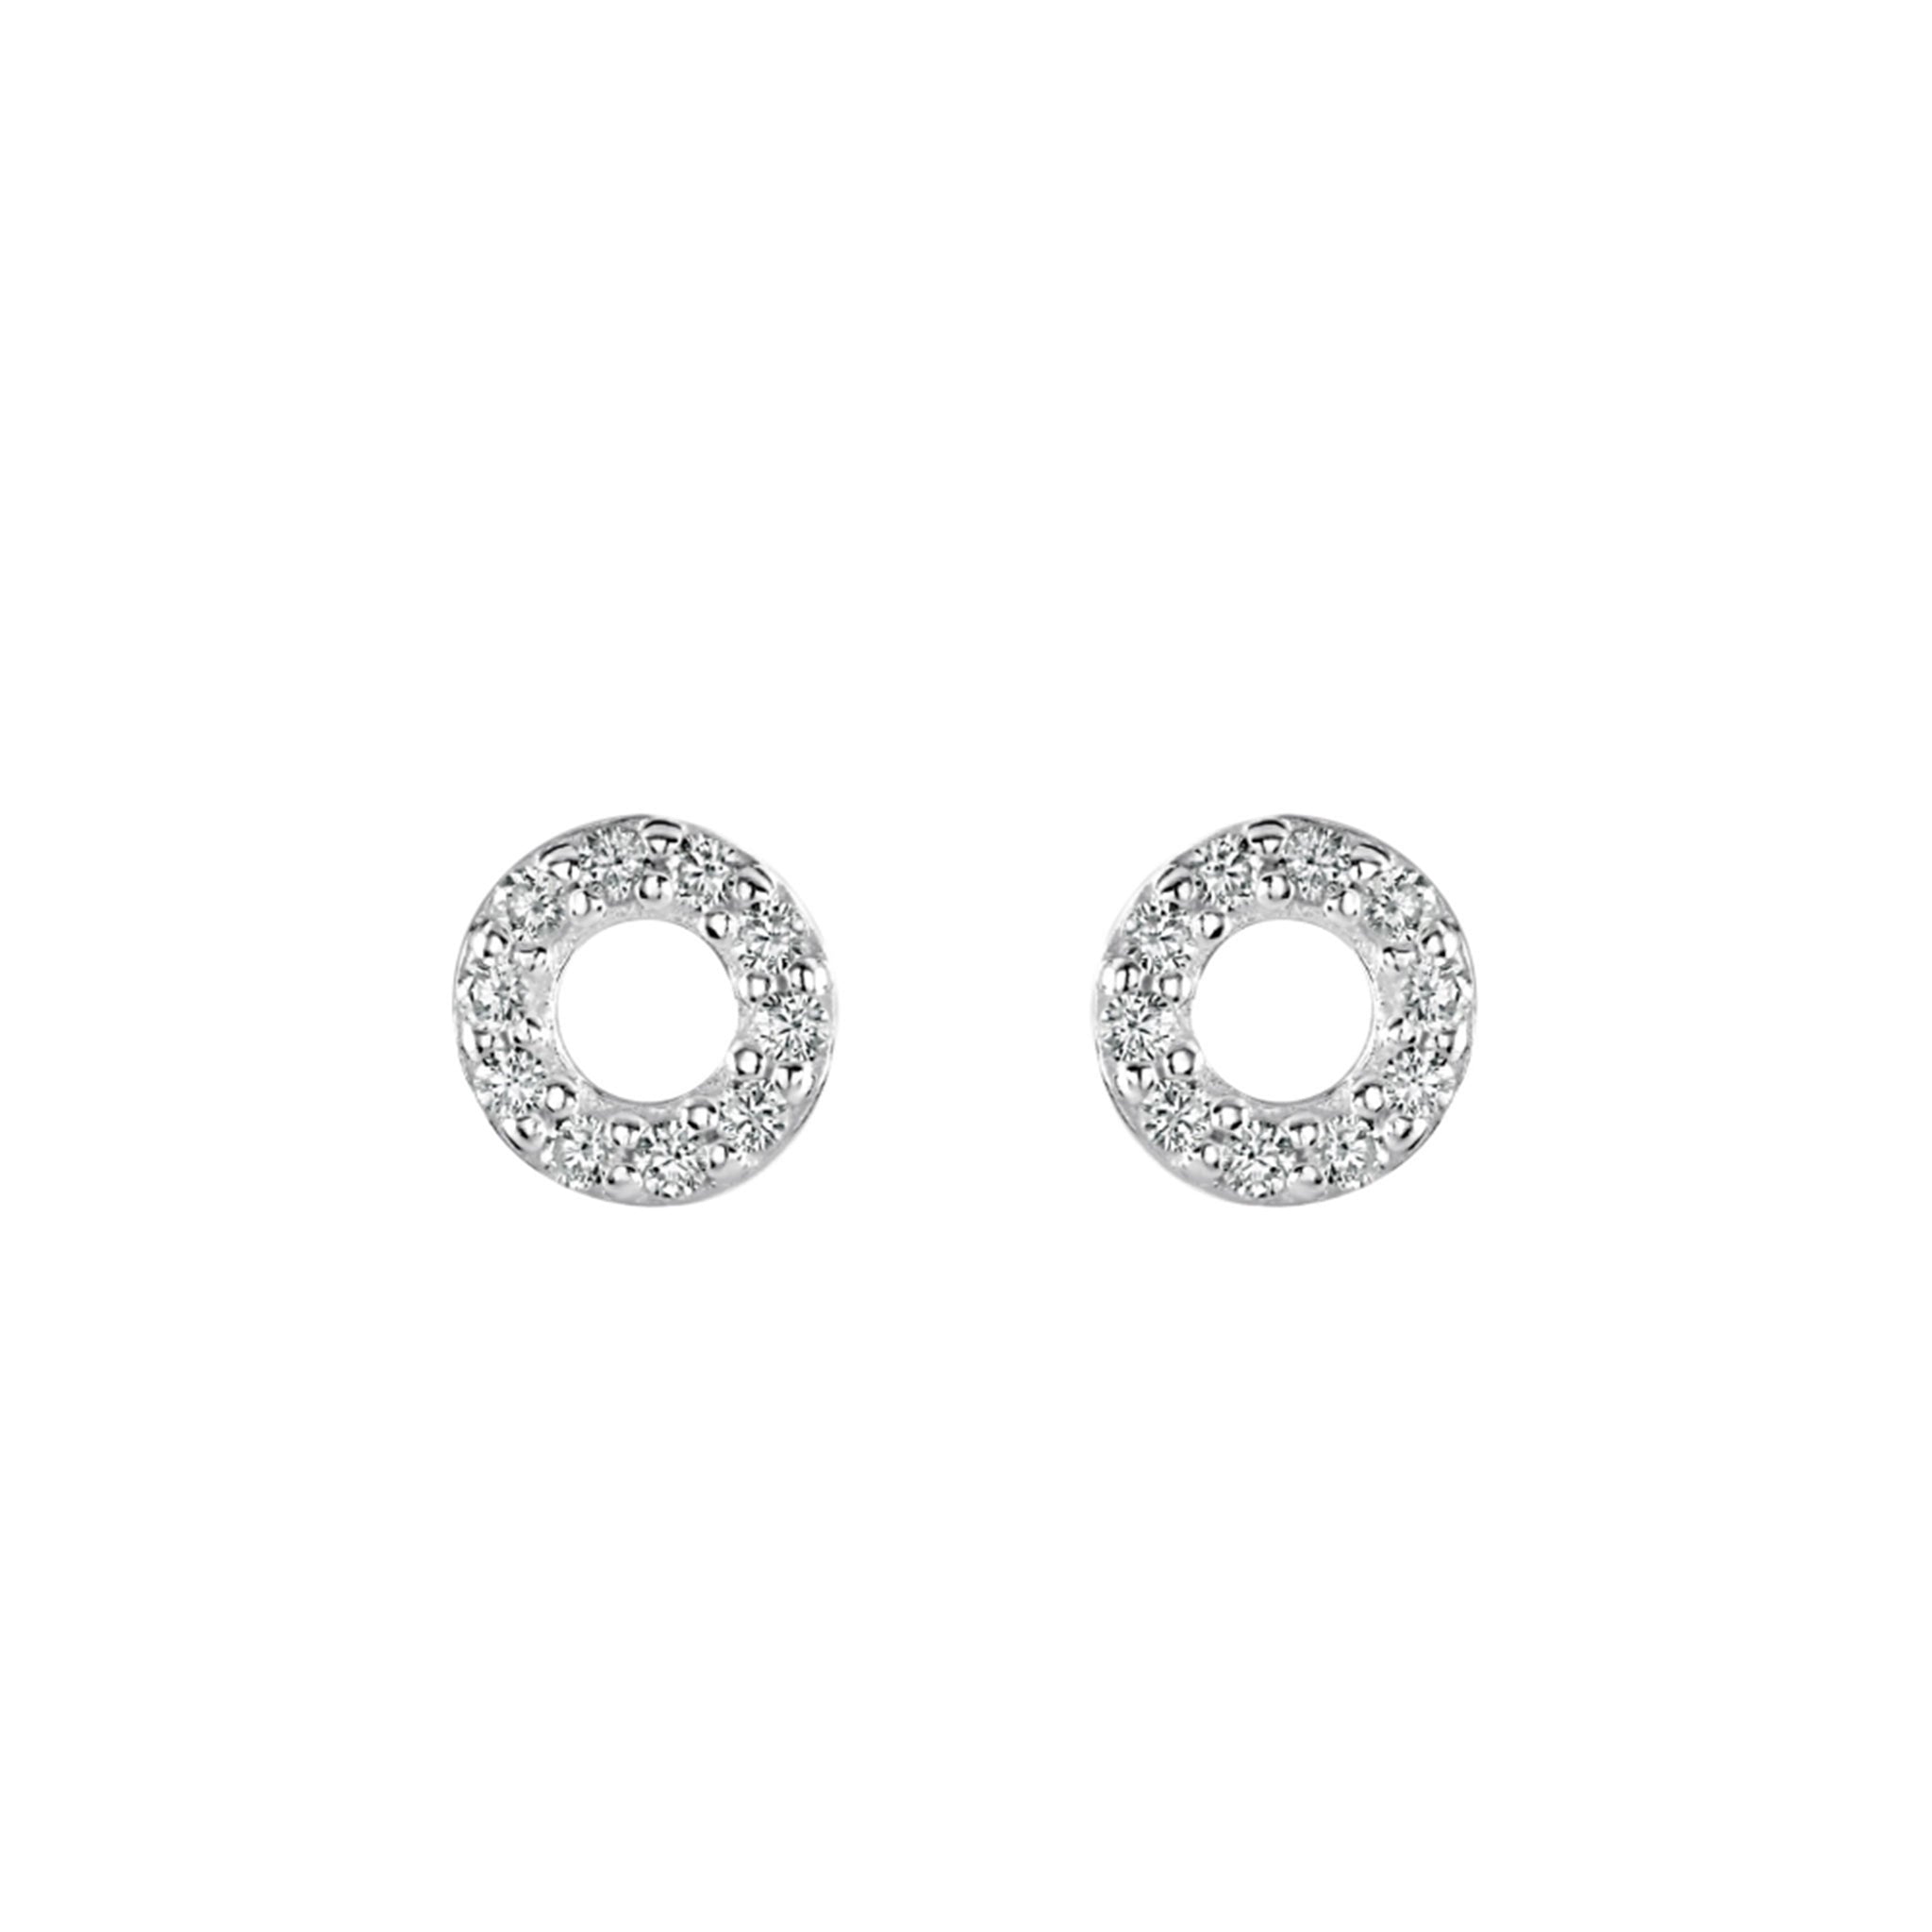 A pair of silver open circle stud earrings set with CZ stones